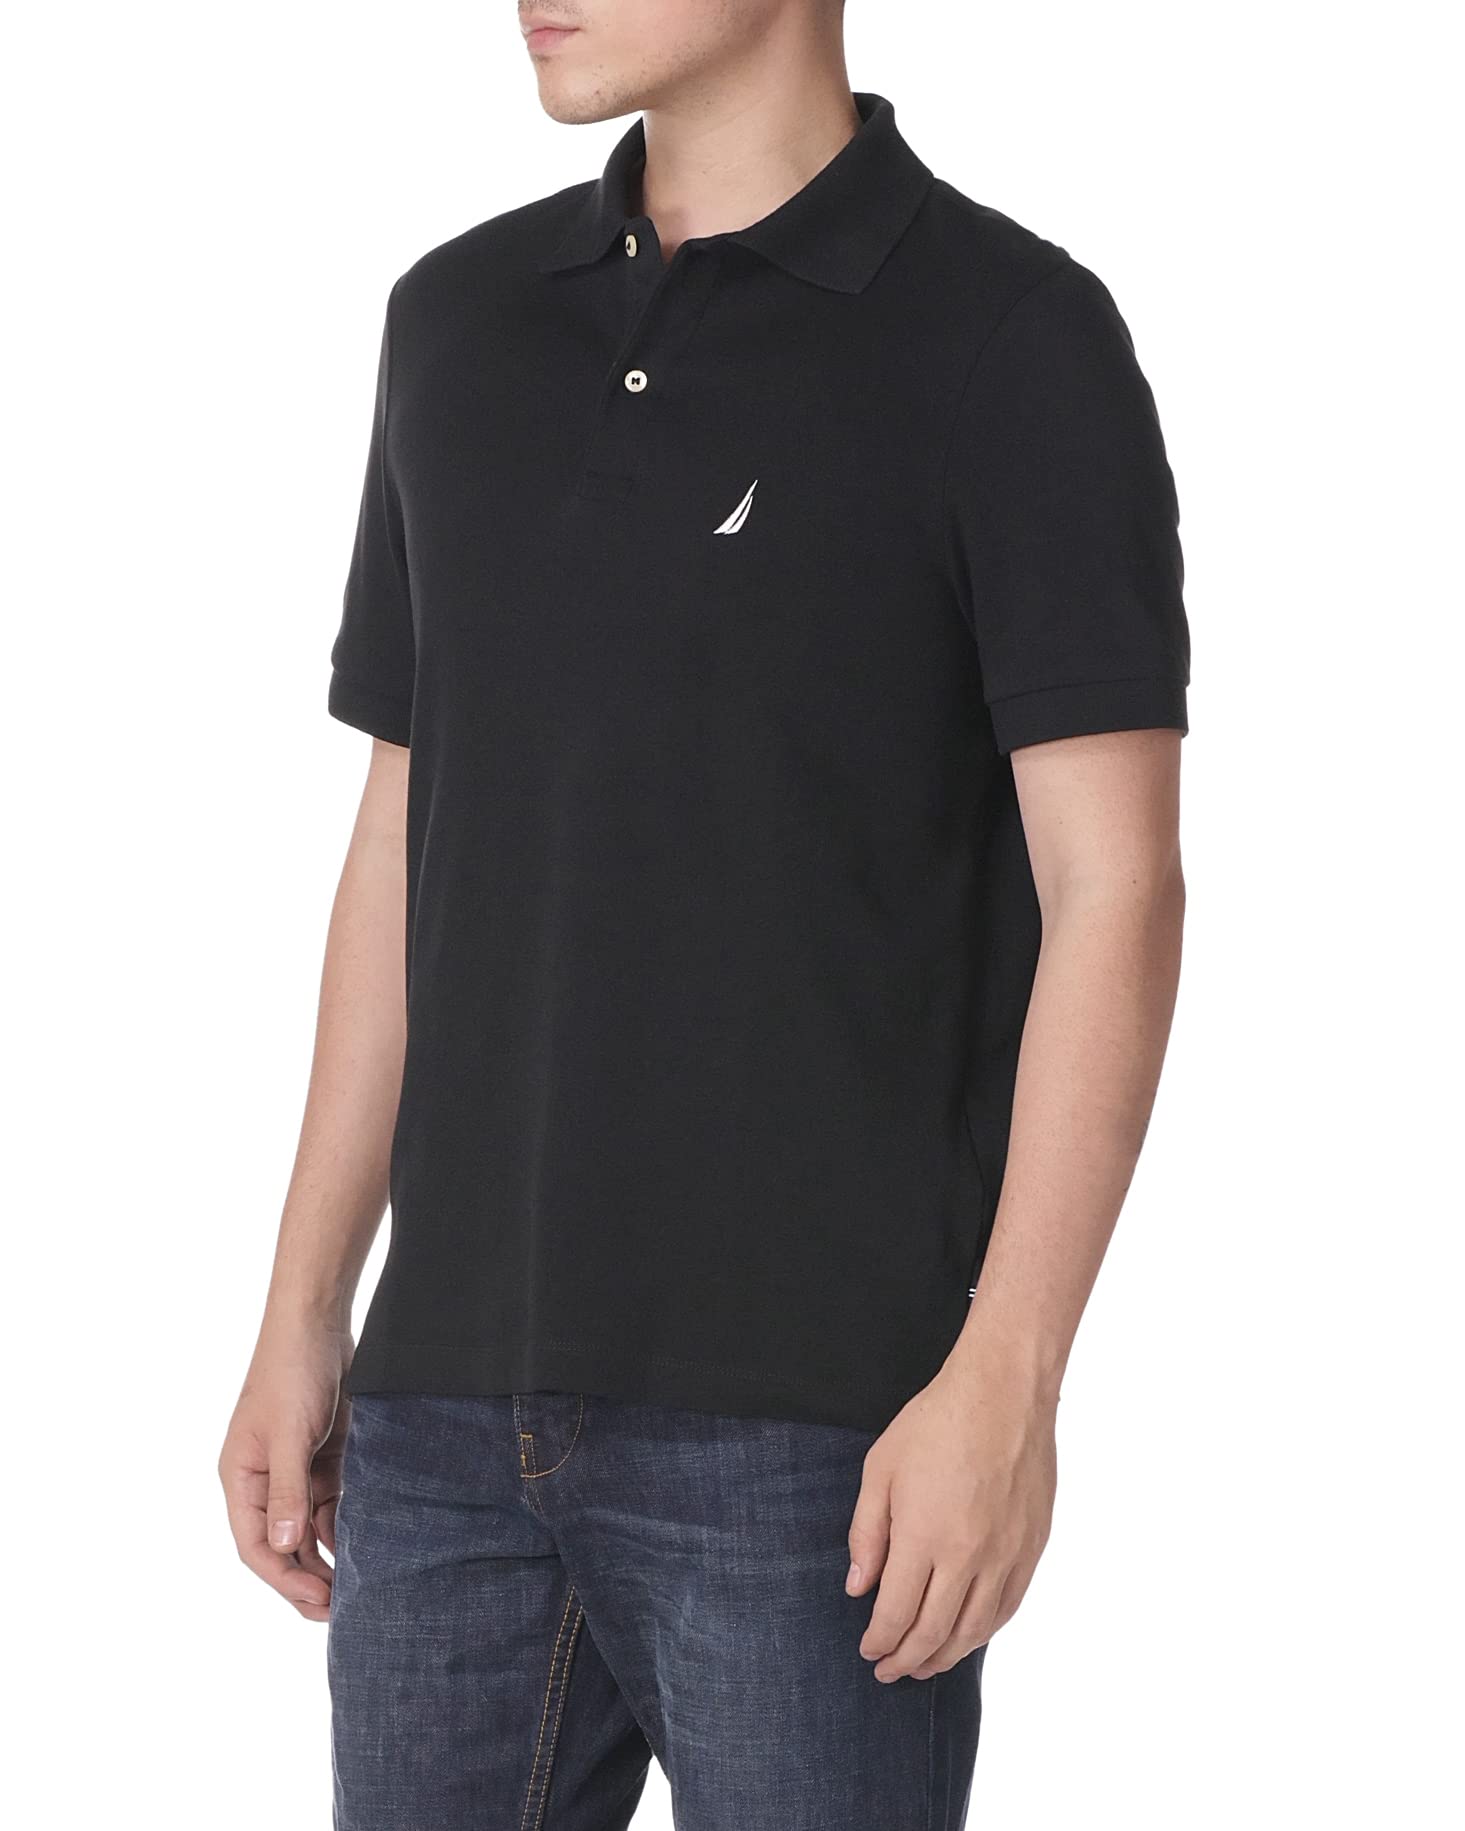 Nautica Men's Classic Fit Short Sleeve Solid Soft Cotton Polo Shirt